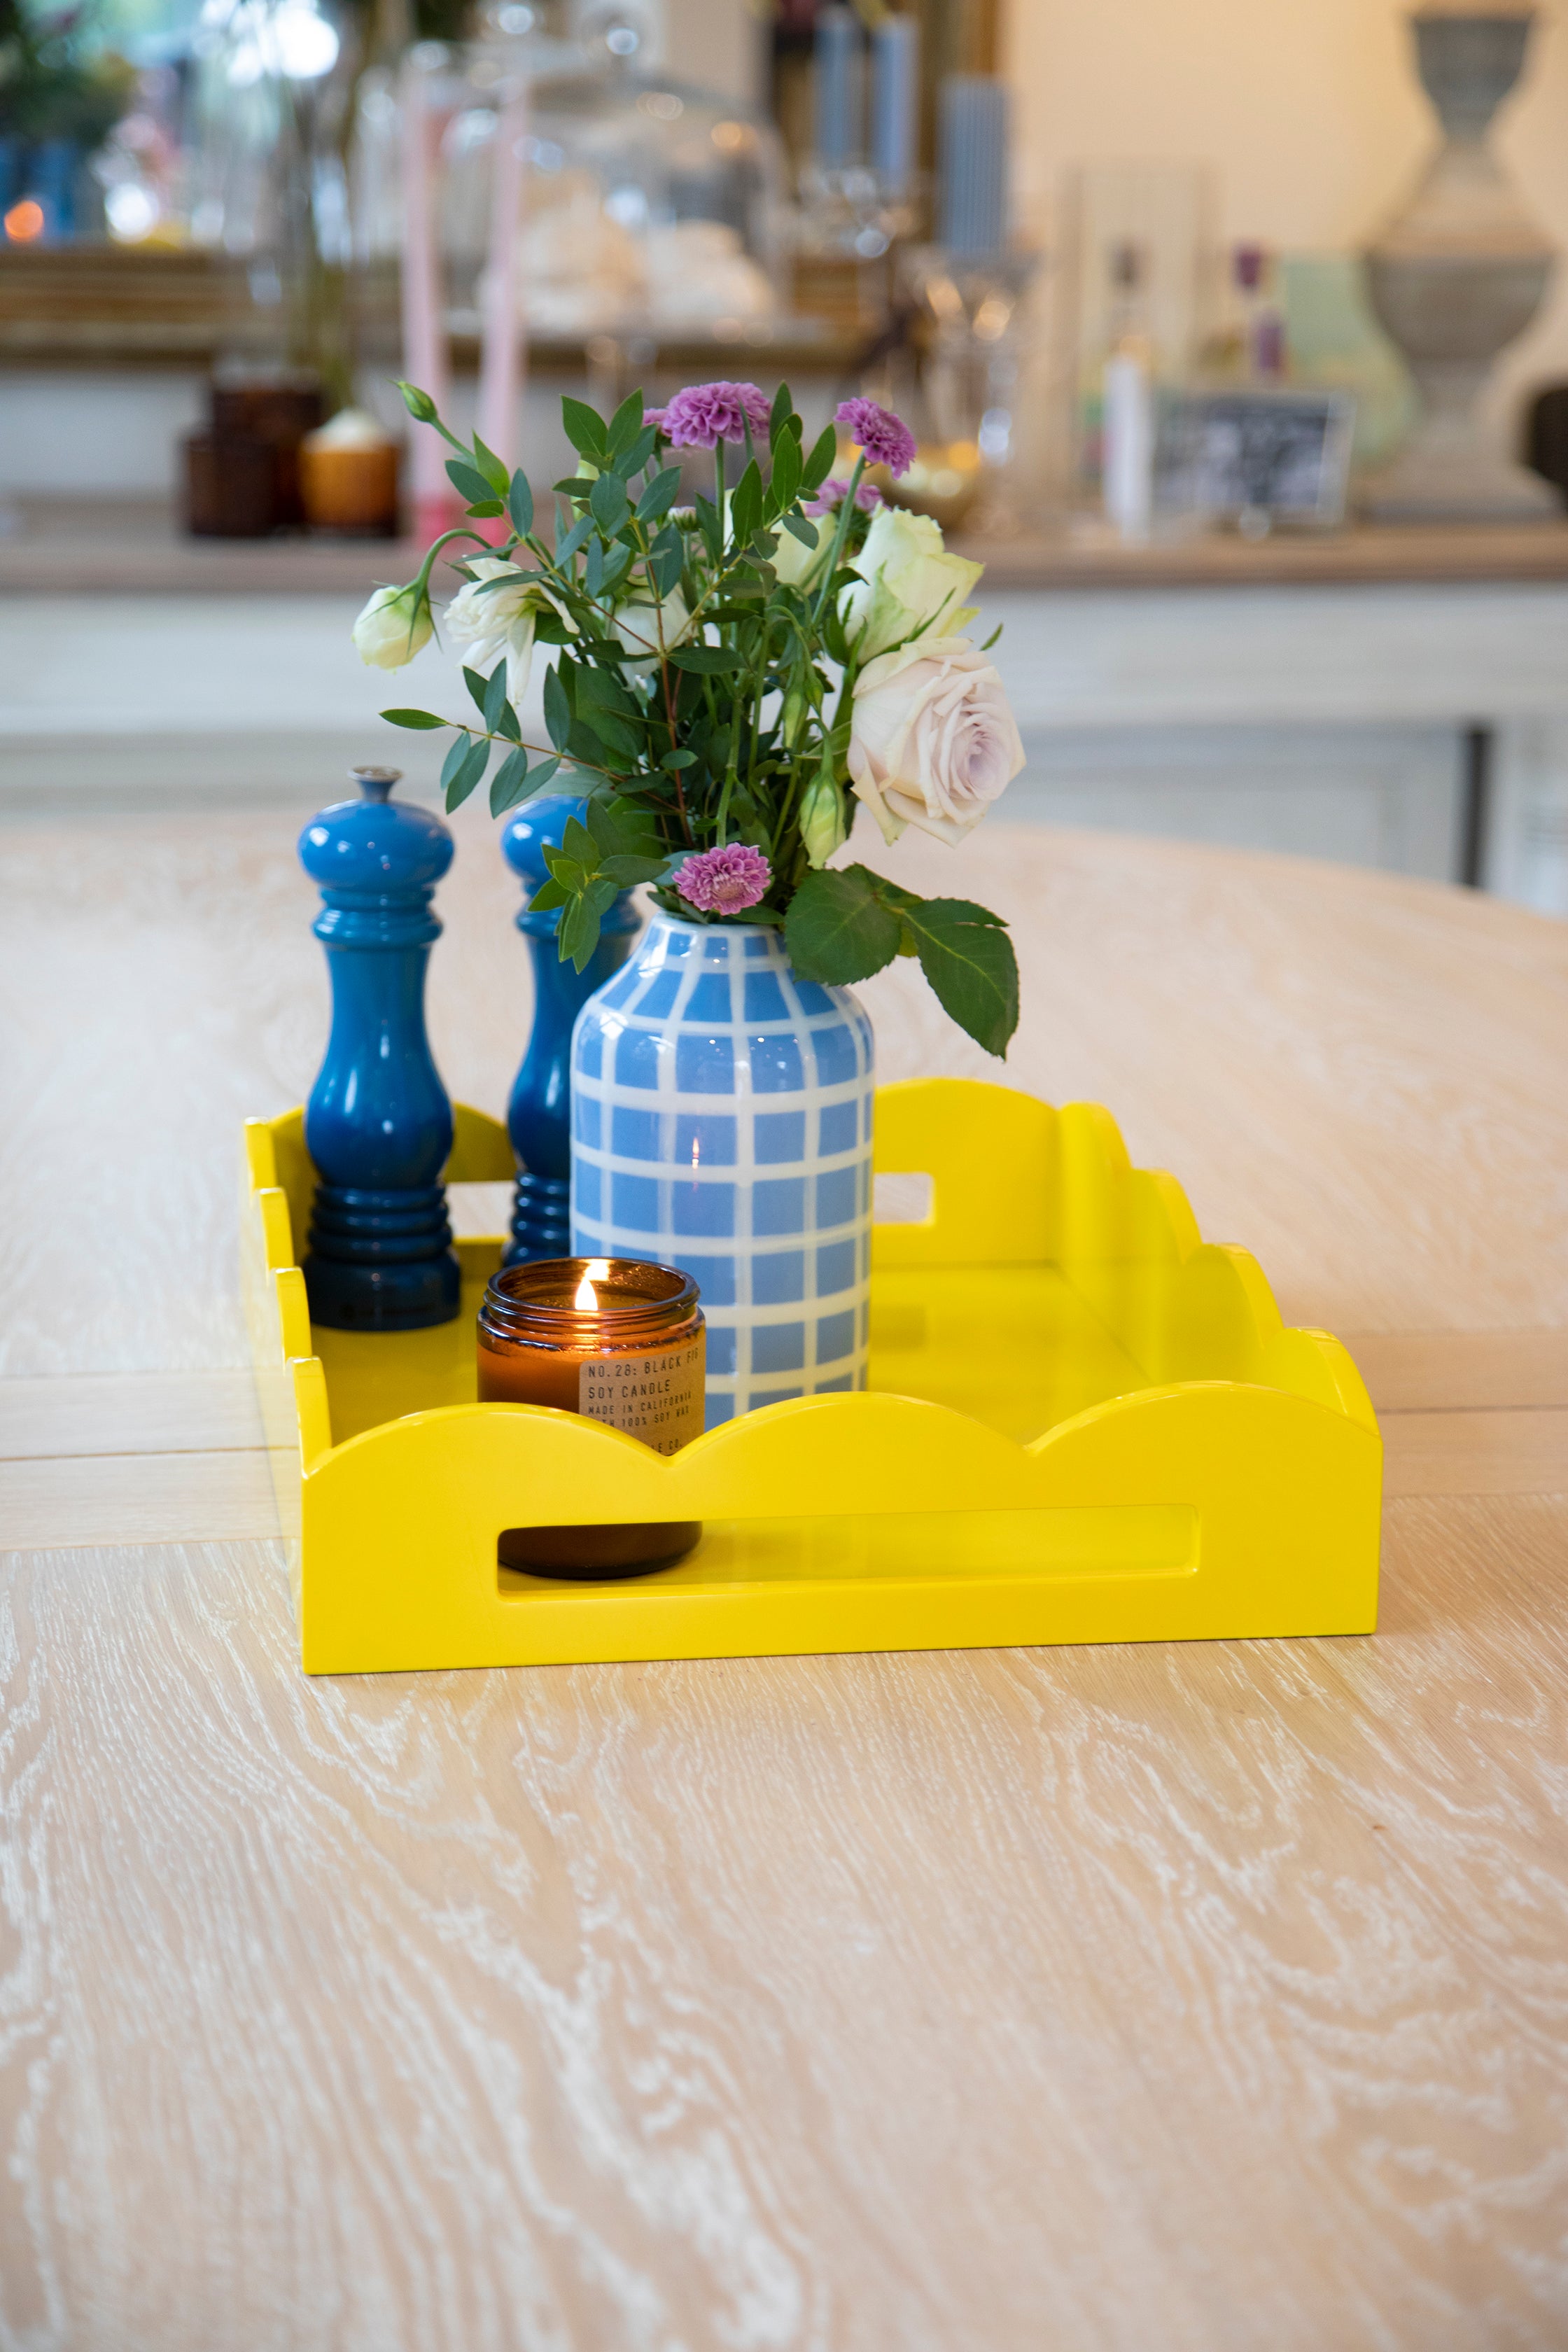 blue vase on a yellow tray